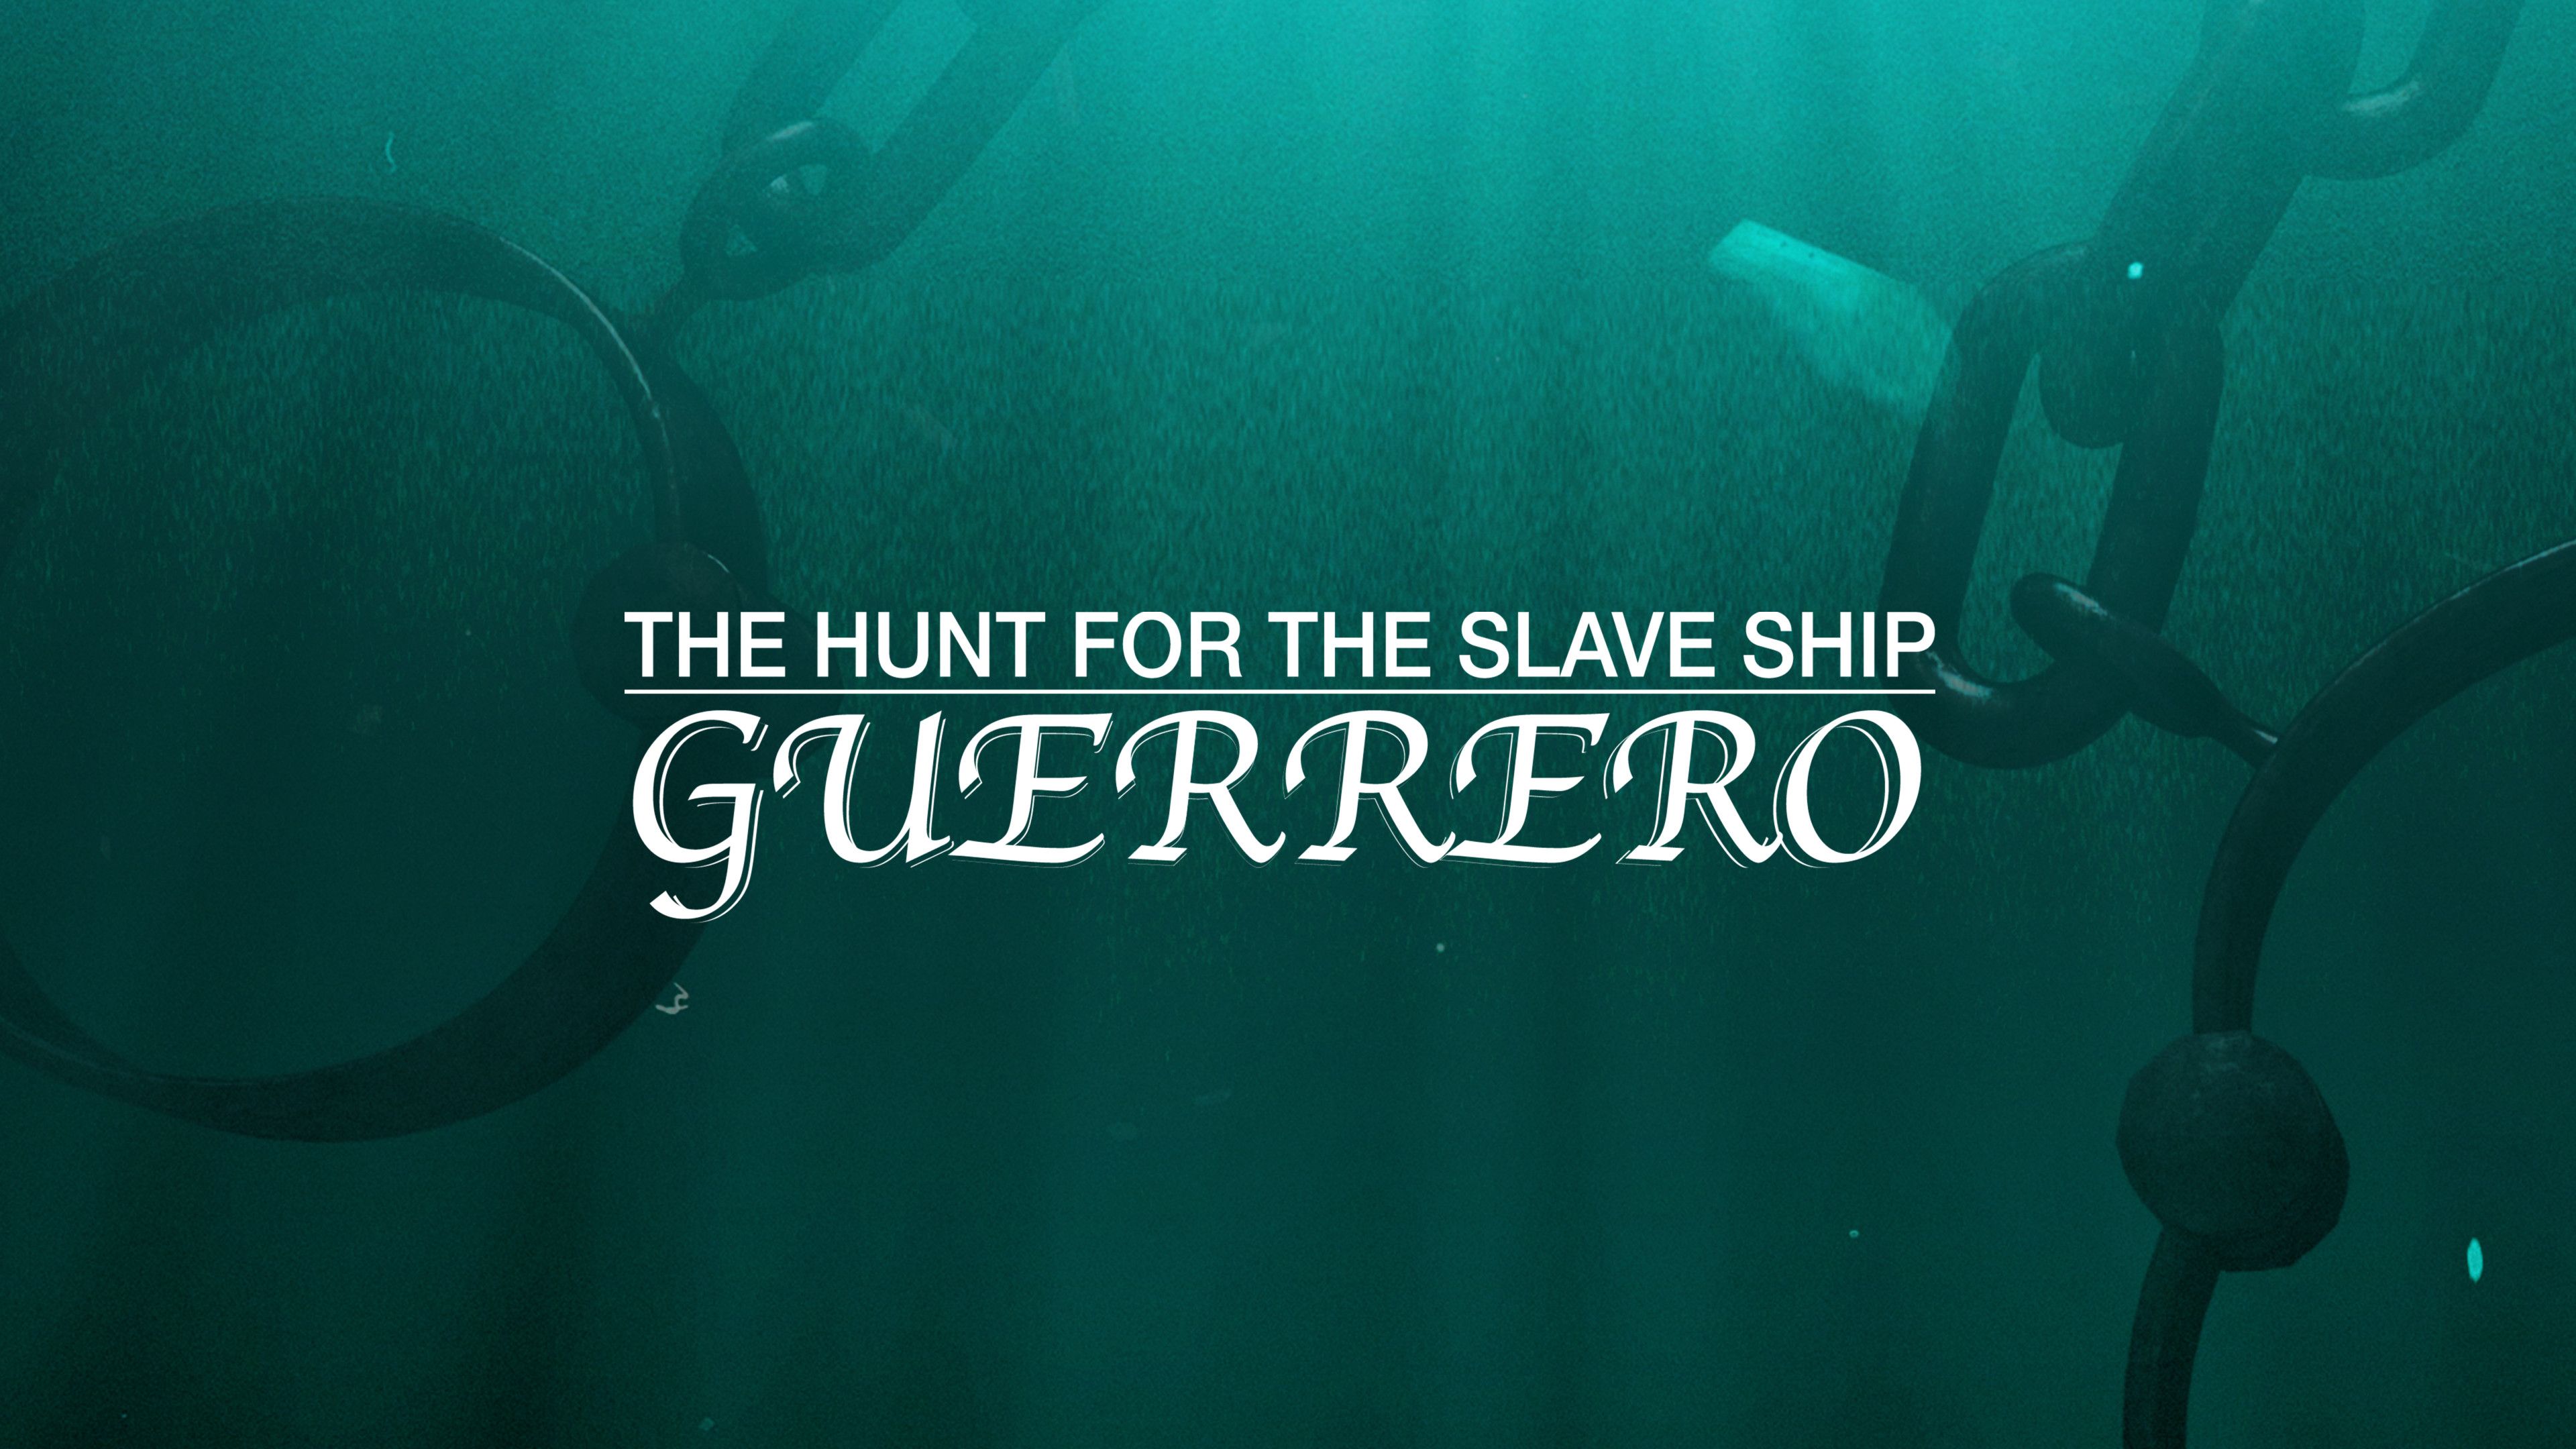 The Hunt for the Slave Ship Guerrero